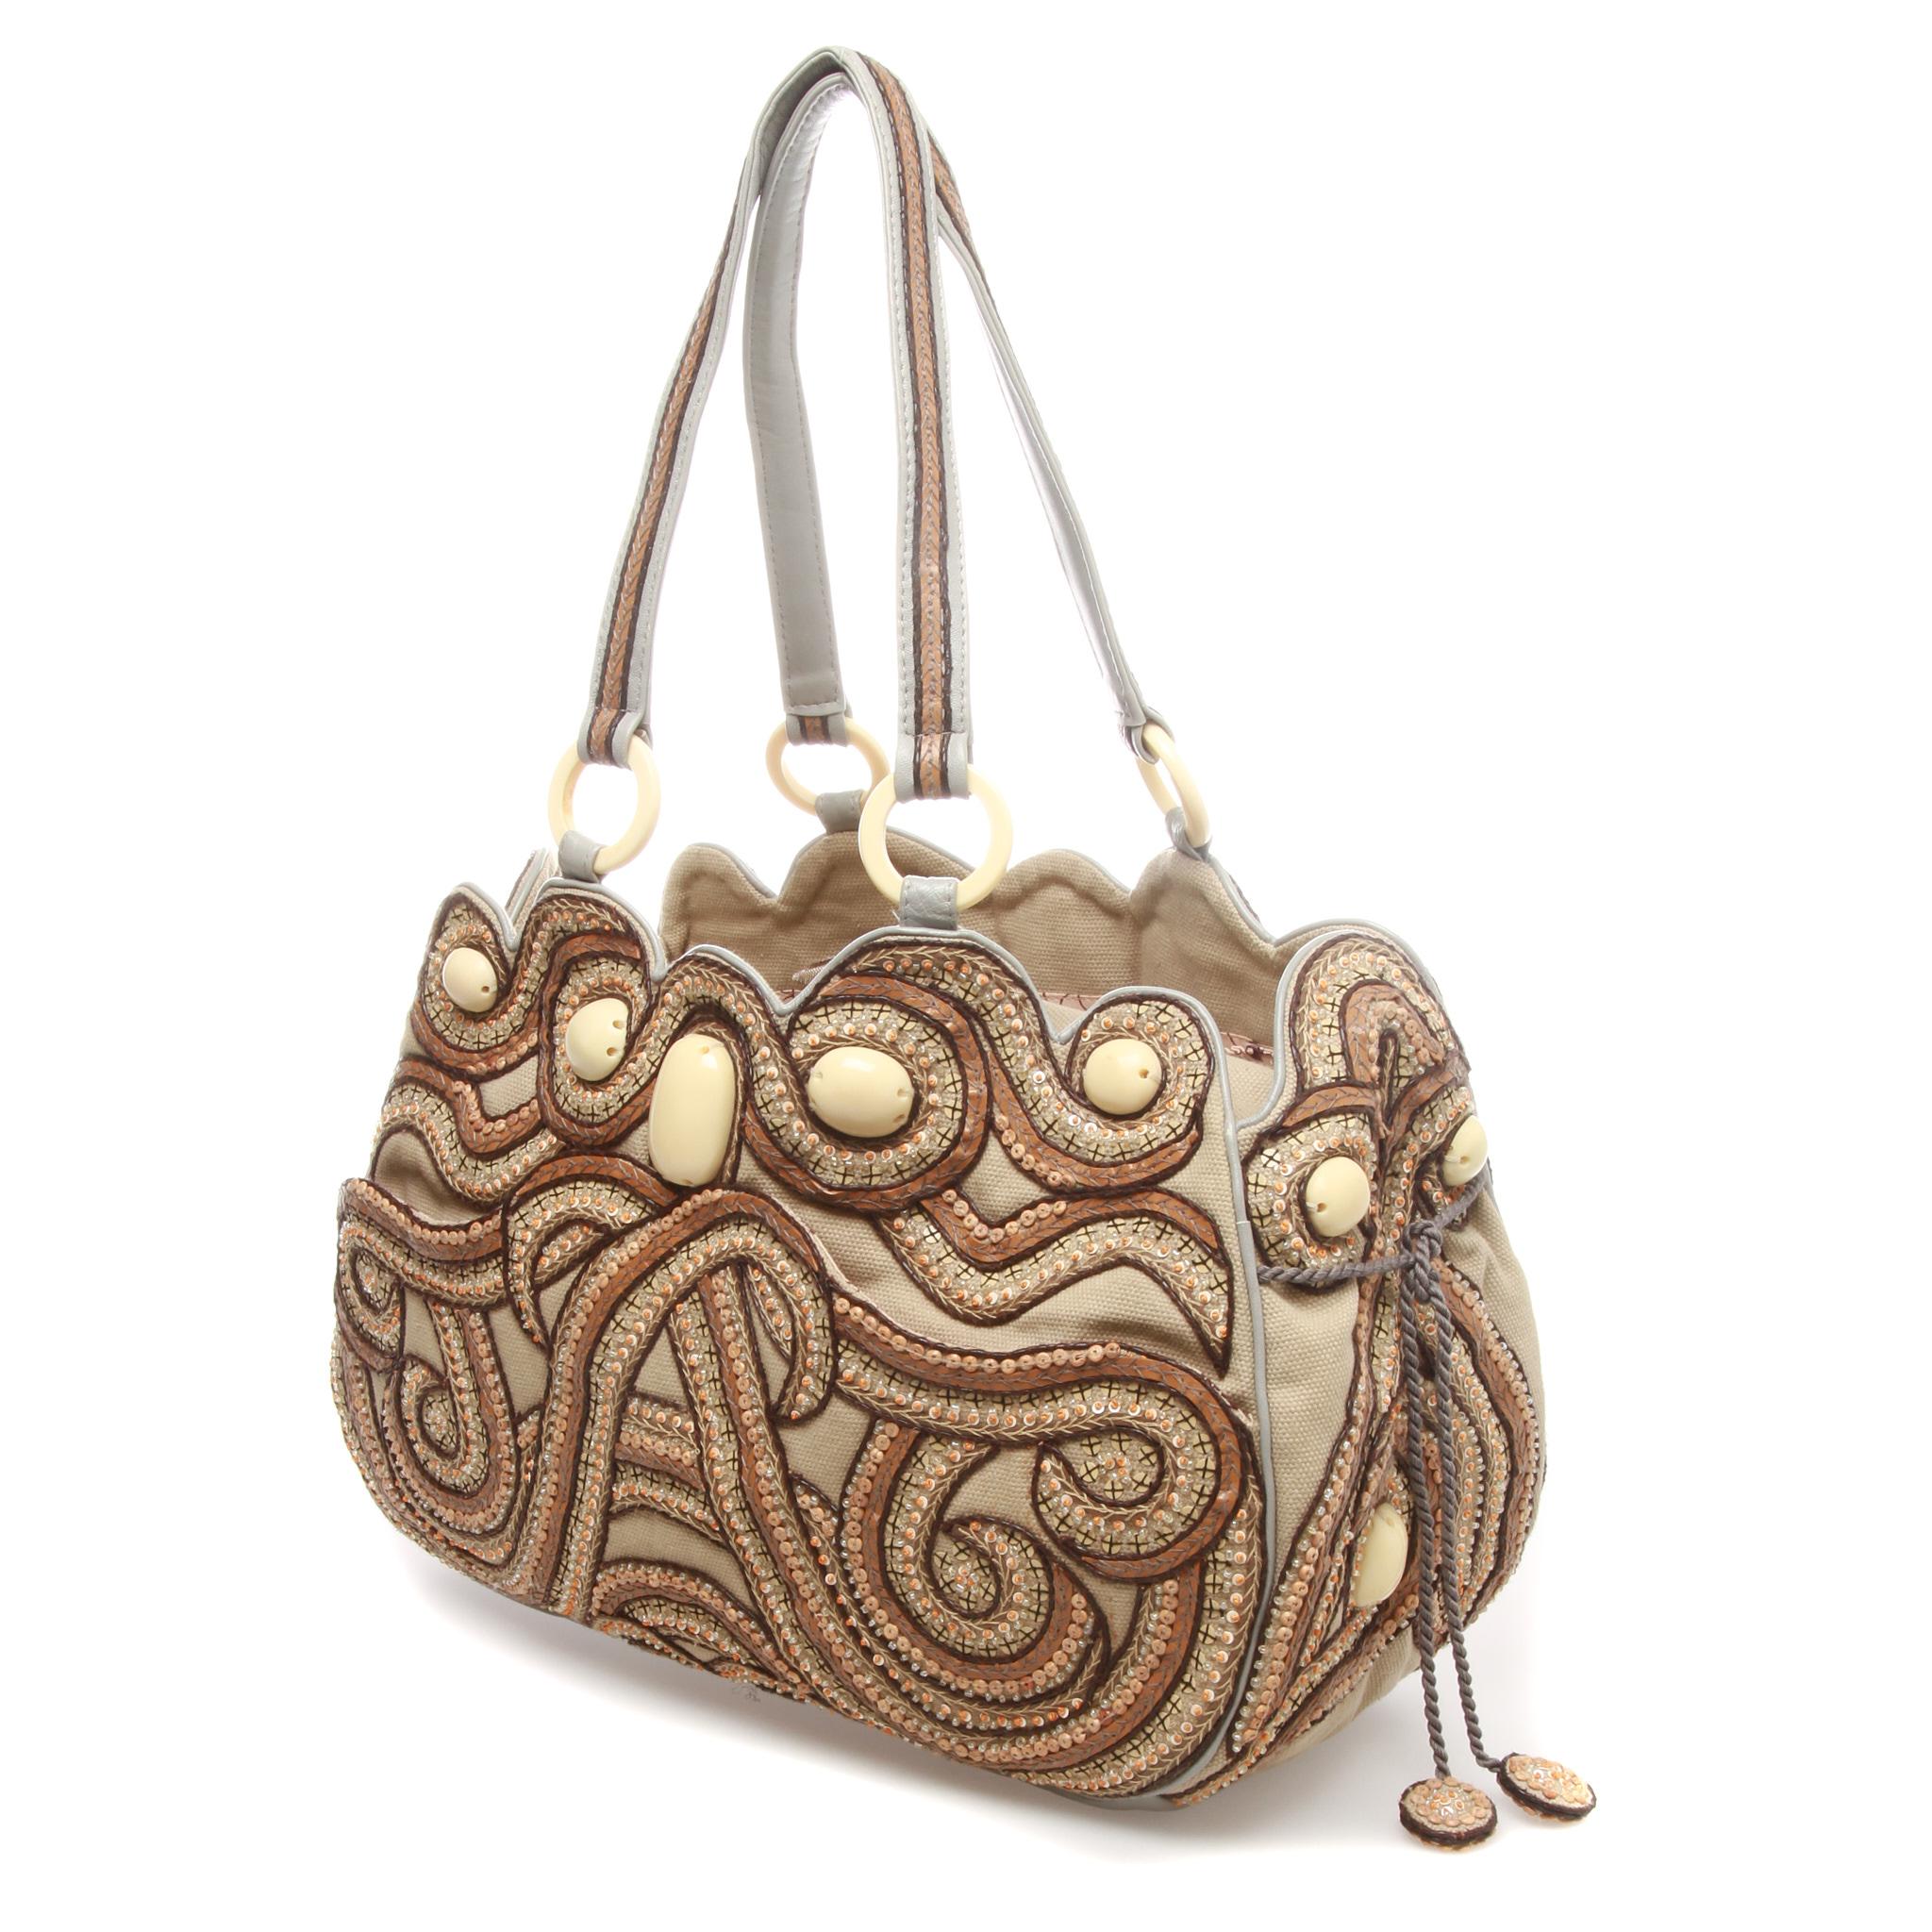 A unique Handmade Jamin Puech Sequin Patterned Fabric Top Handle Handbag 

Beautifully crafted Austrian crystal beads embellished unique shape handbag.
It features a central flap closure and a double straps handle.